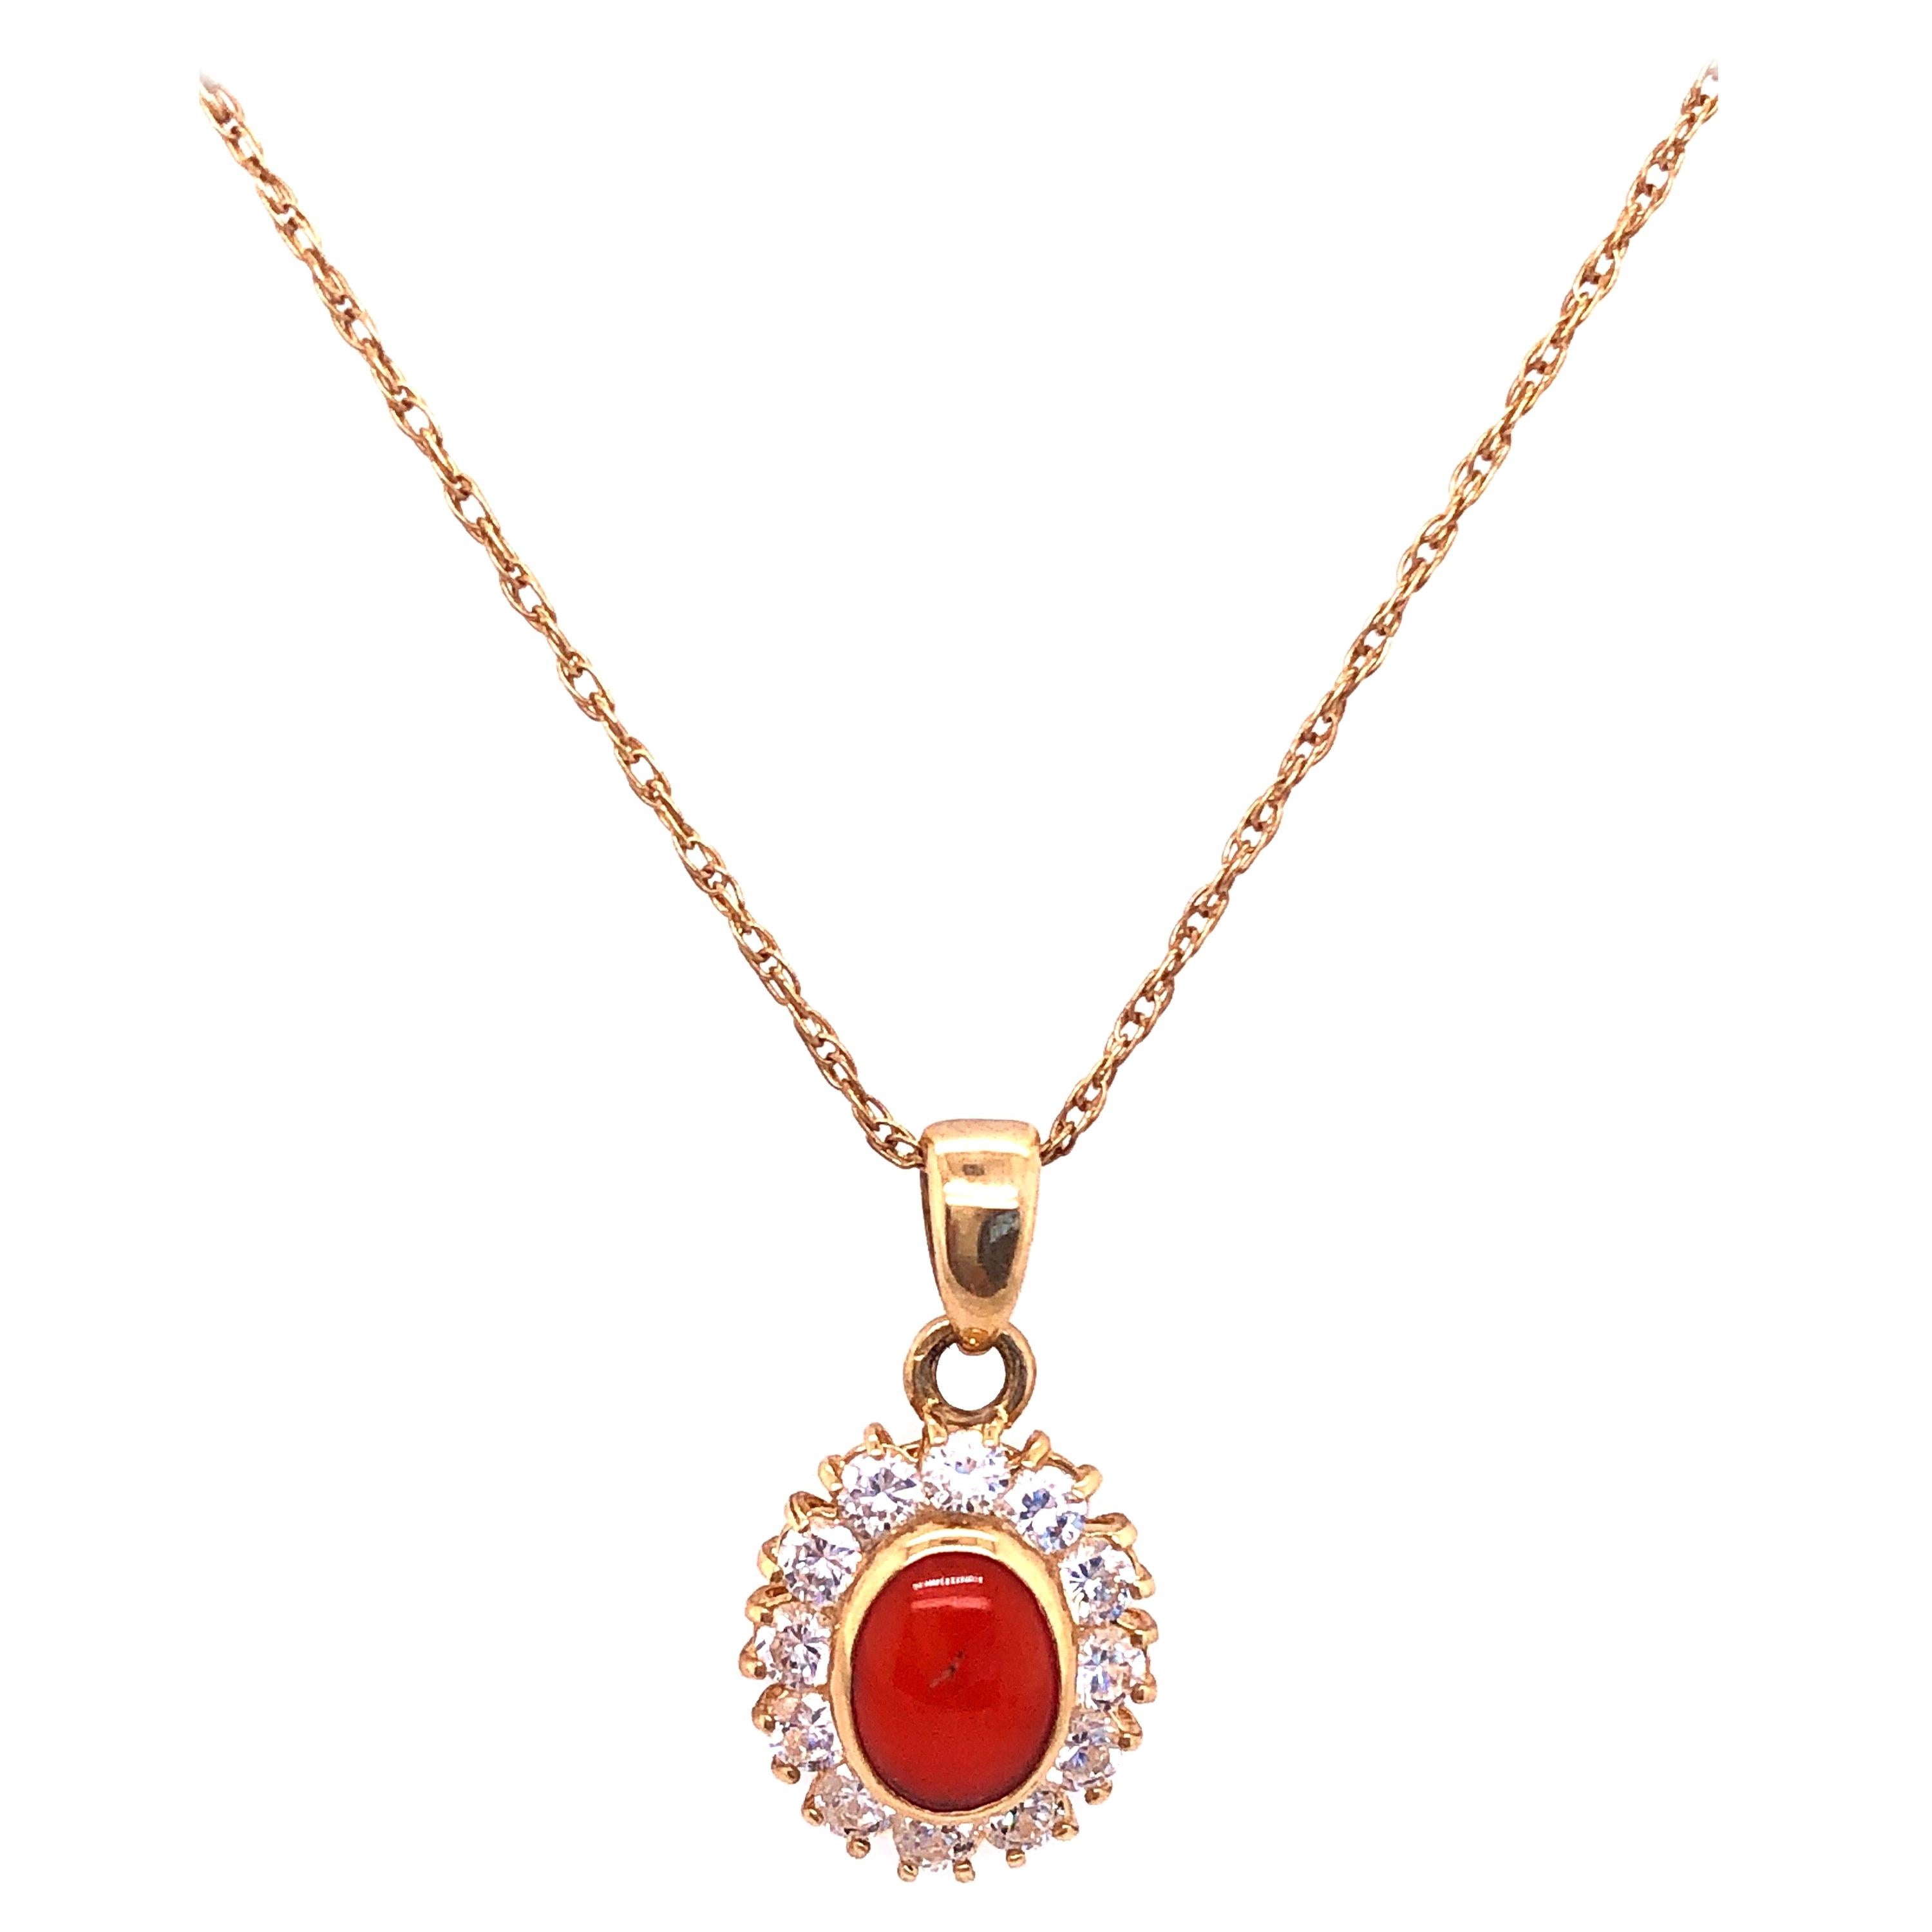 14 Karat Yellow Gold Necklace with Oval Coral and Round Zirconium Pendant For Sale